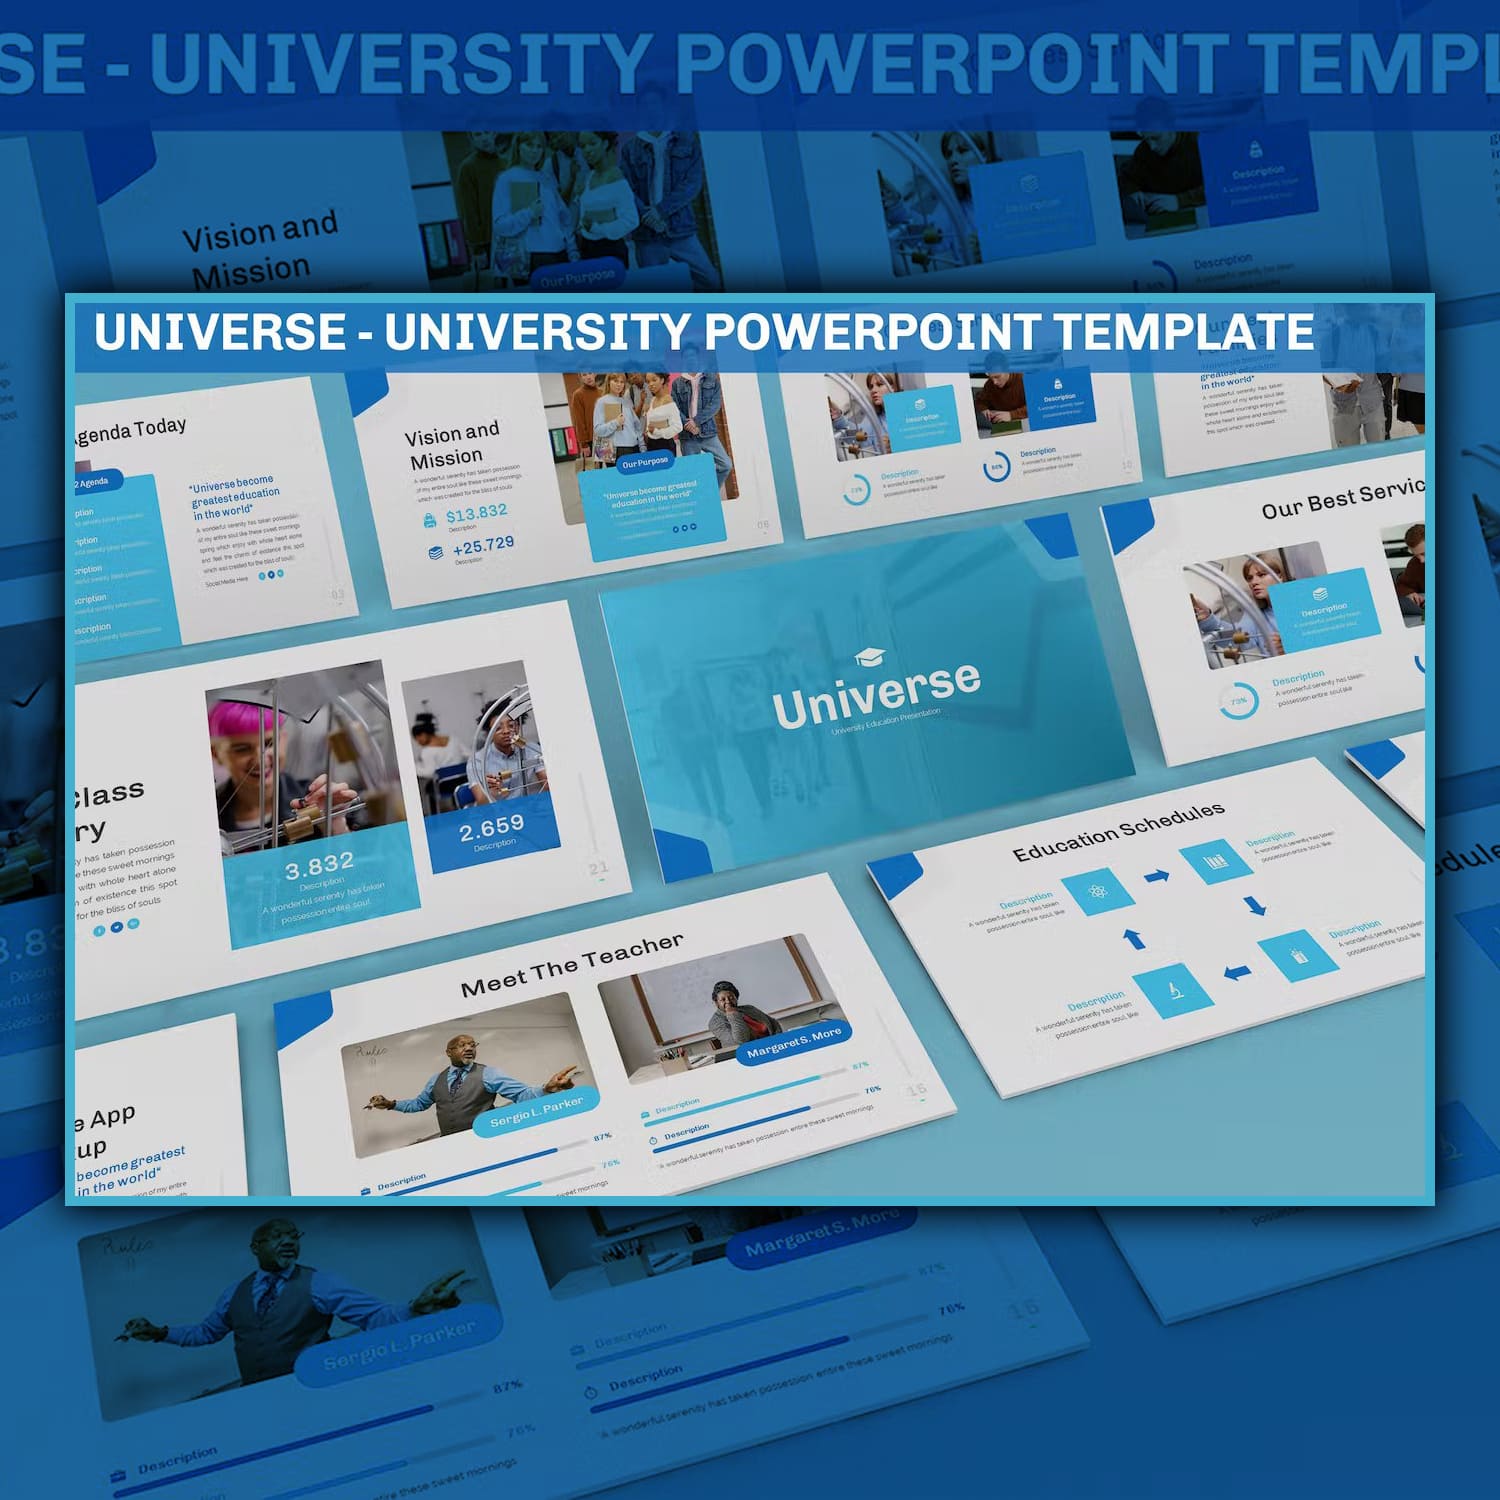 Universe University Powerpoint Template - main image preview.